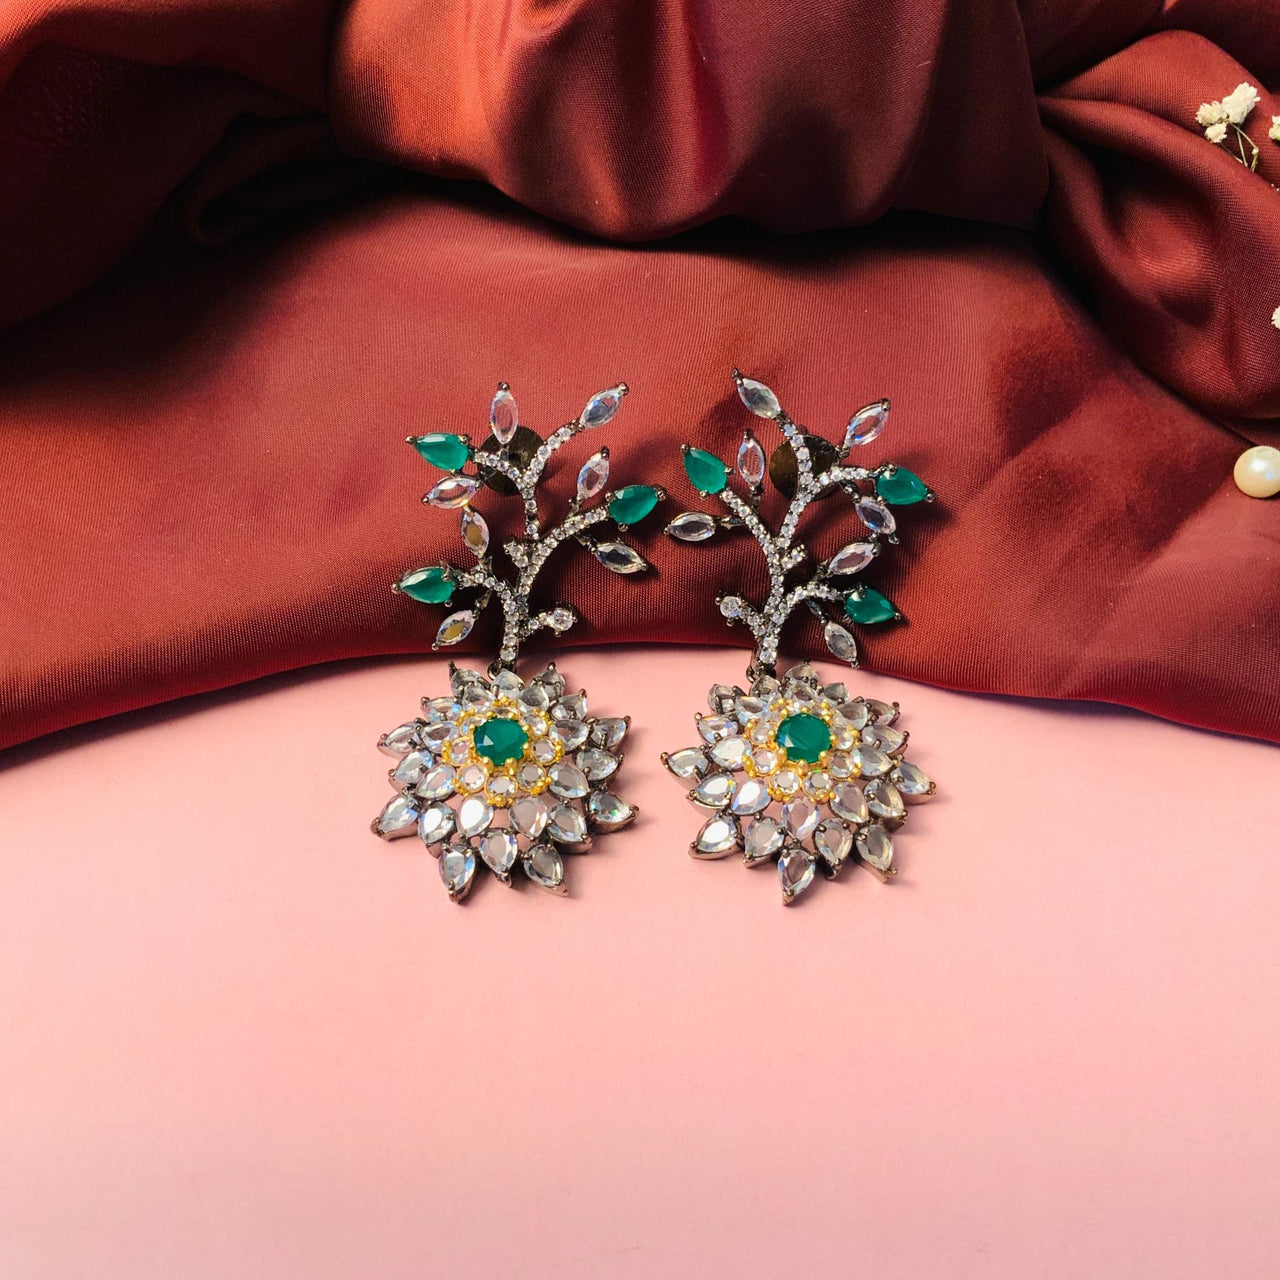 Gorgeous Victorian Silver Tone Green-White Flower Earring